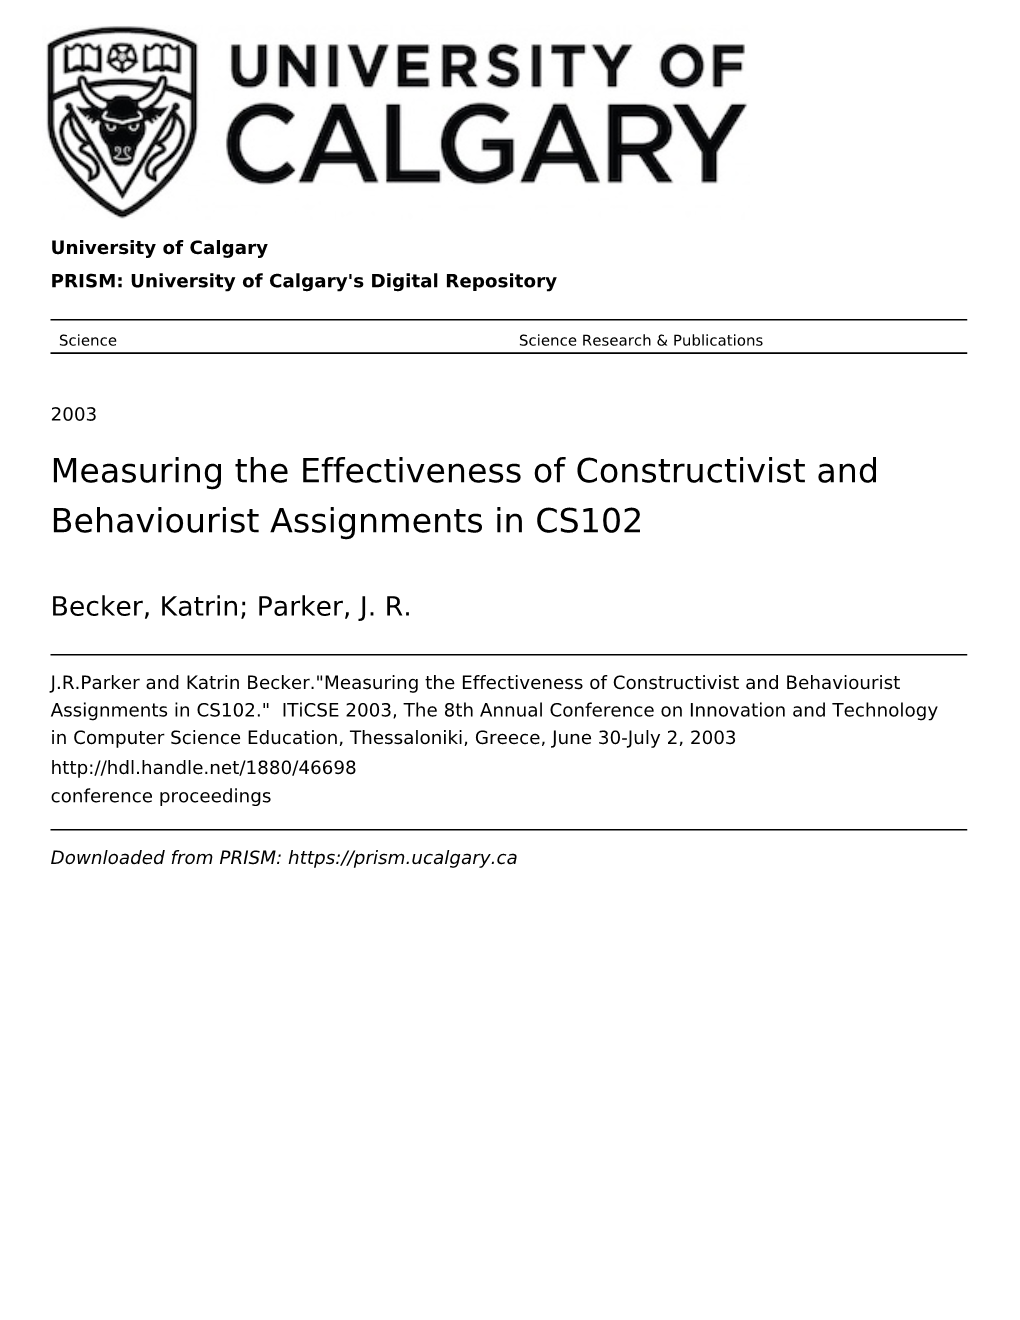 Measuring the Effectiveness of Constructivist and Behaviourist Assignments in CS102